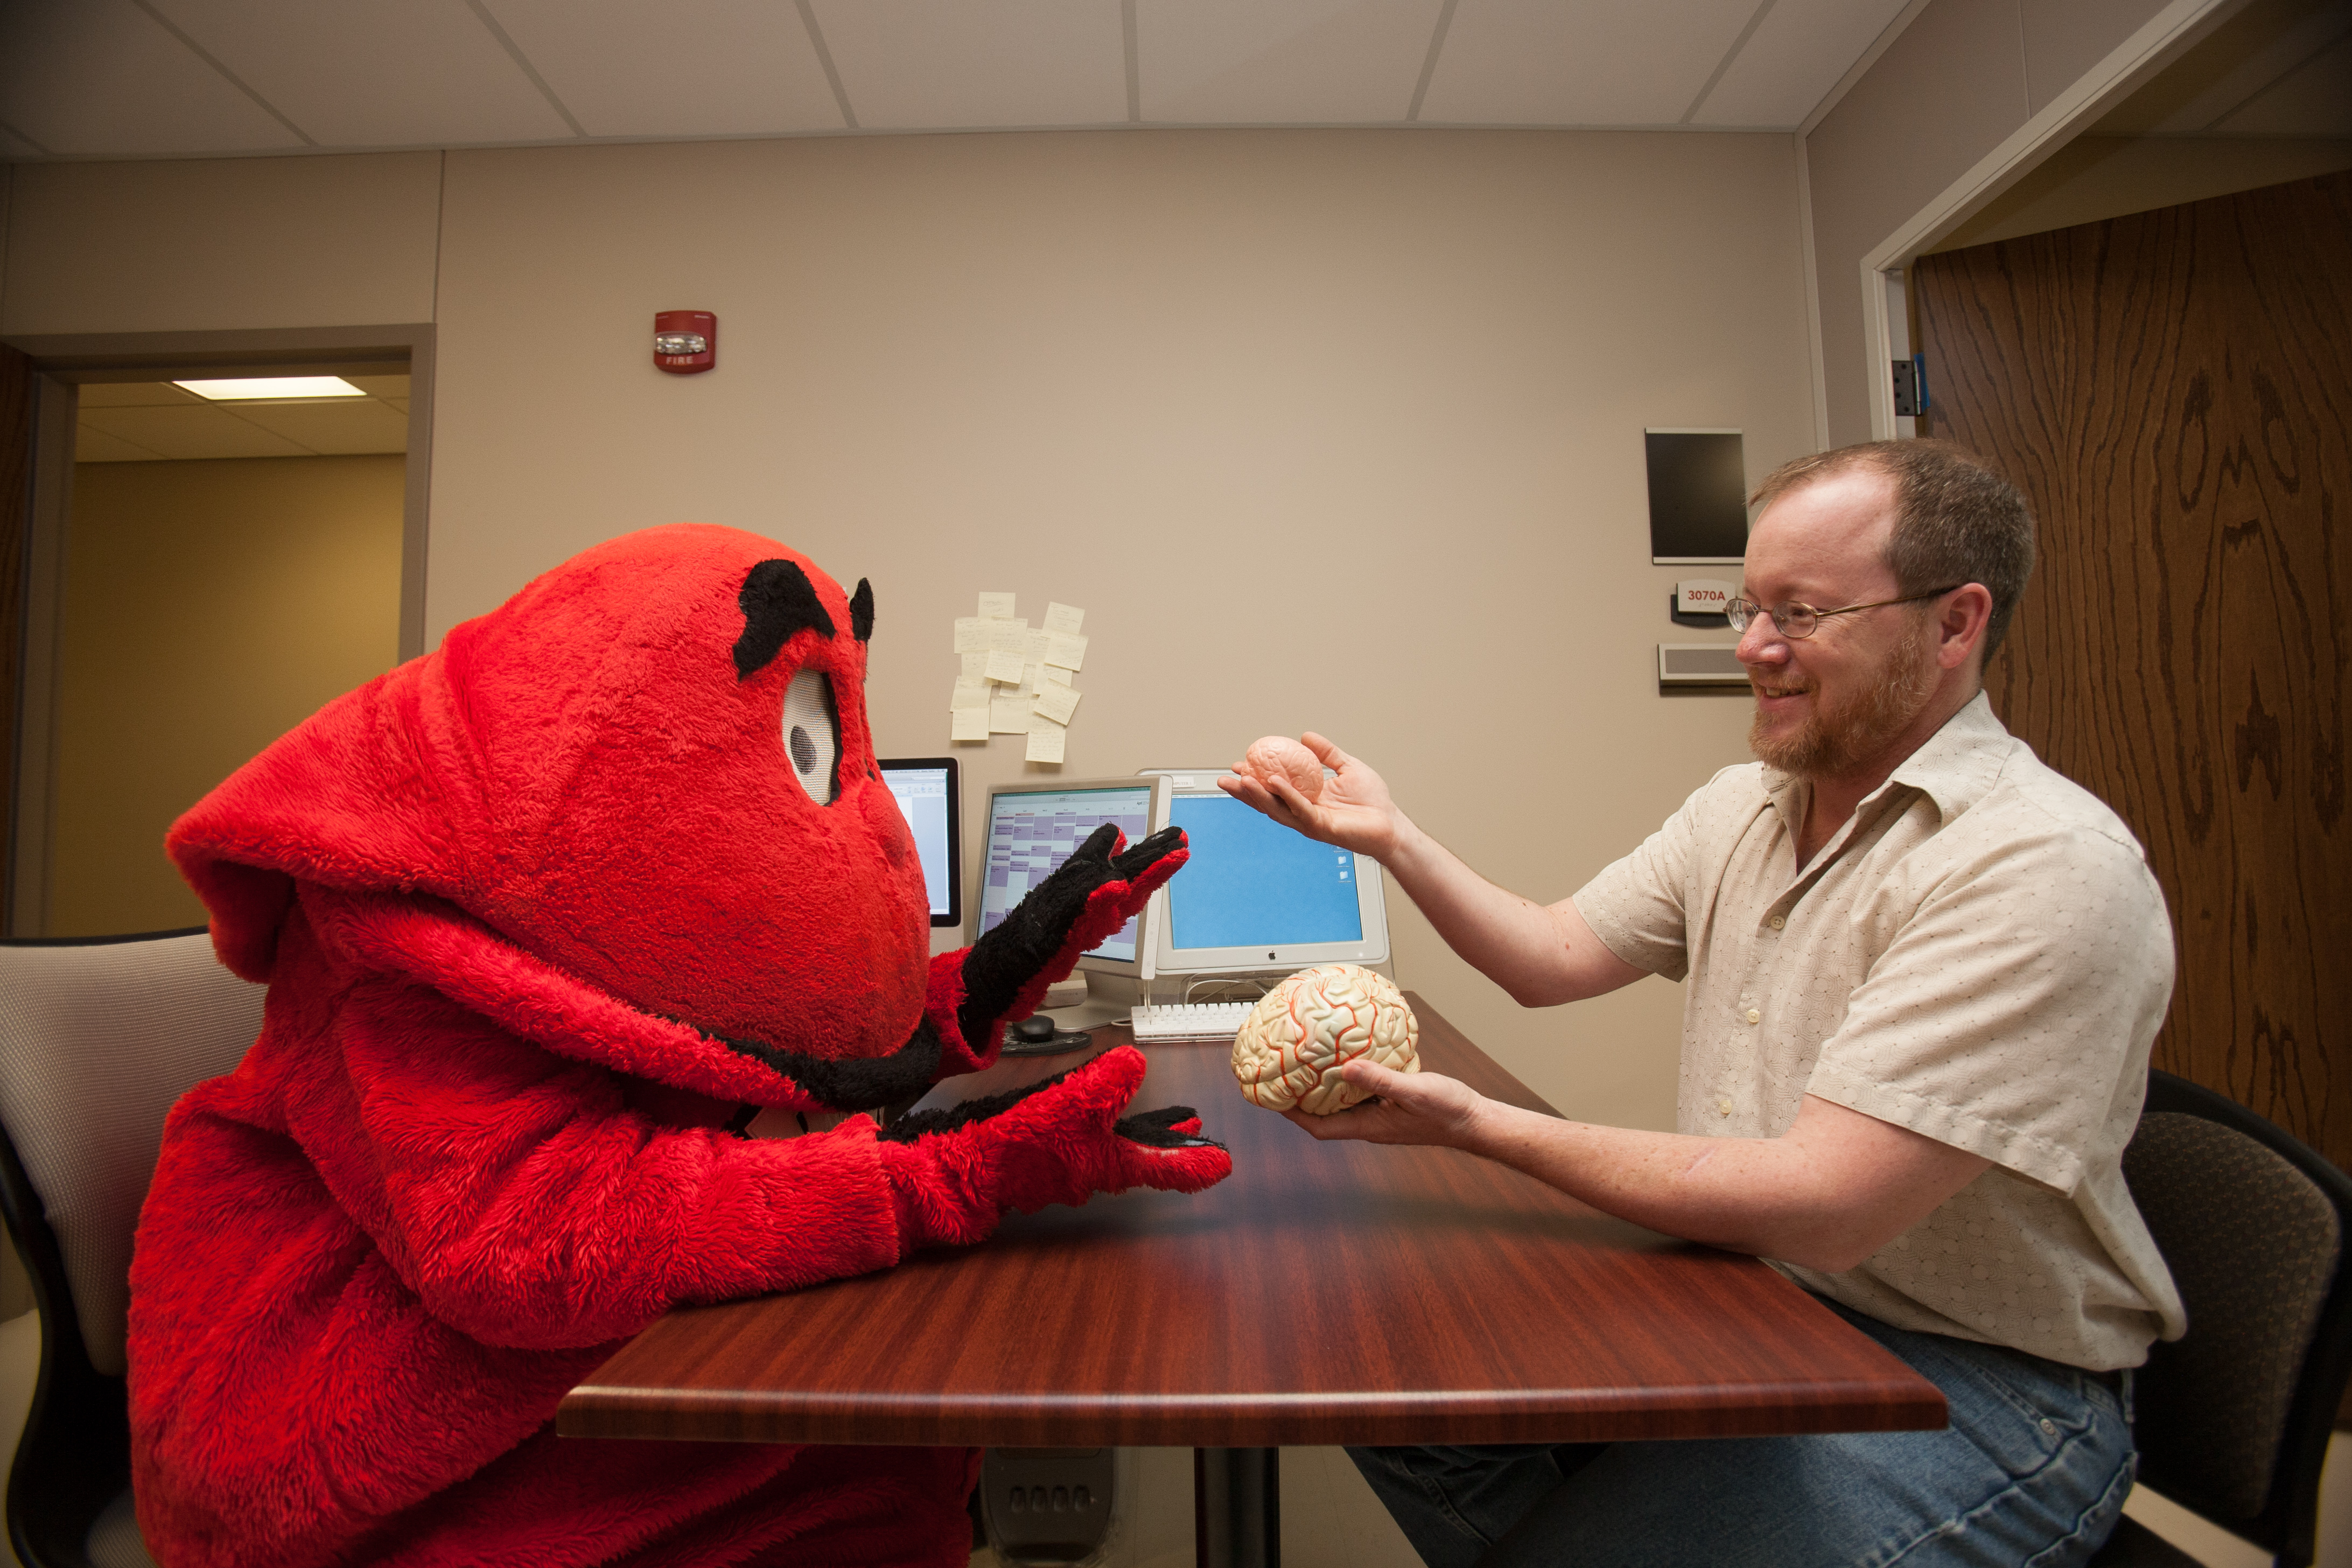 WKU professor sits across the table from Big Red and holds up two models of brains.